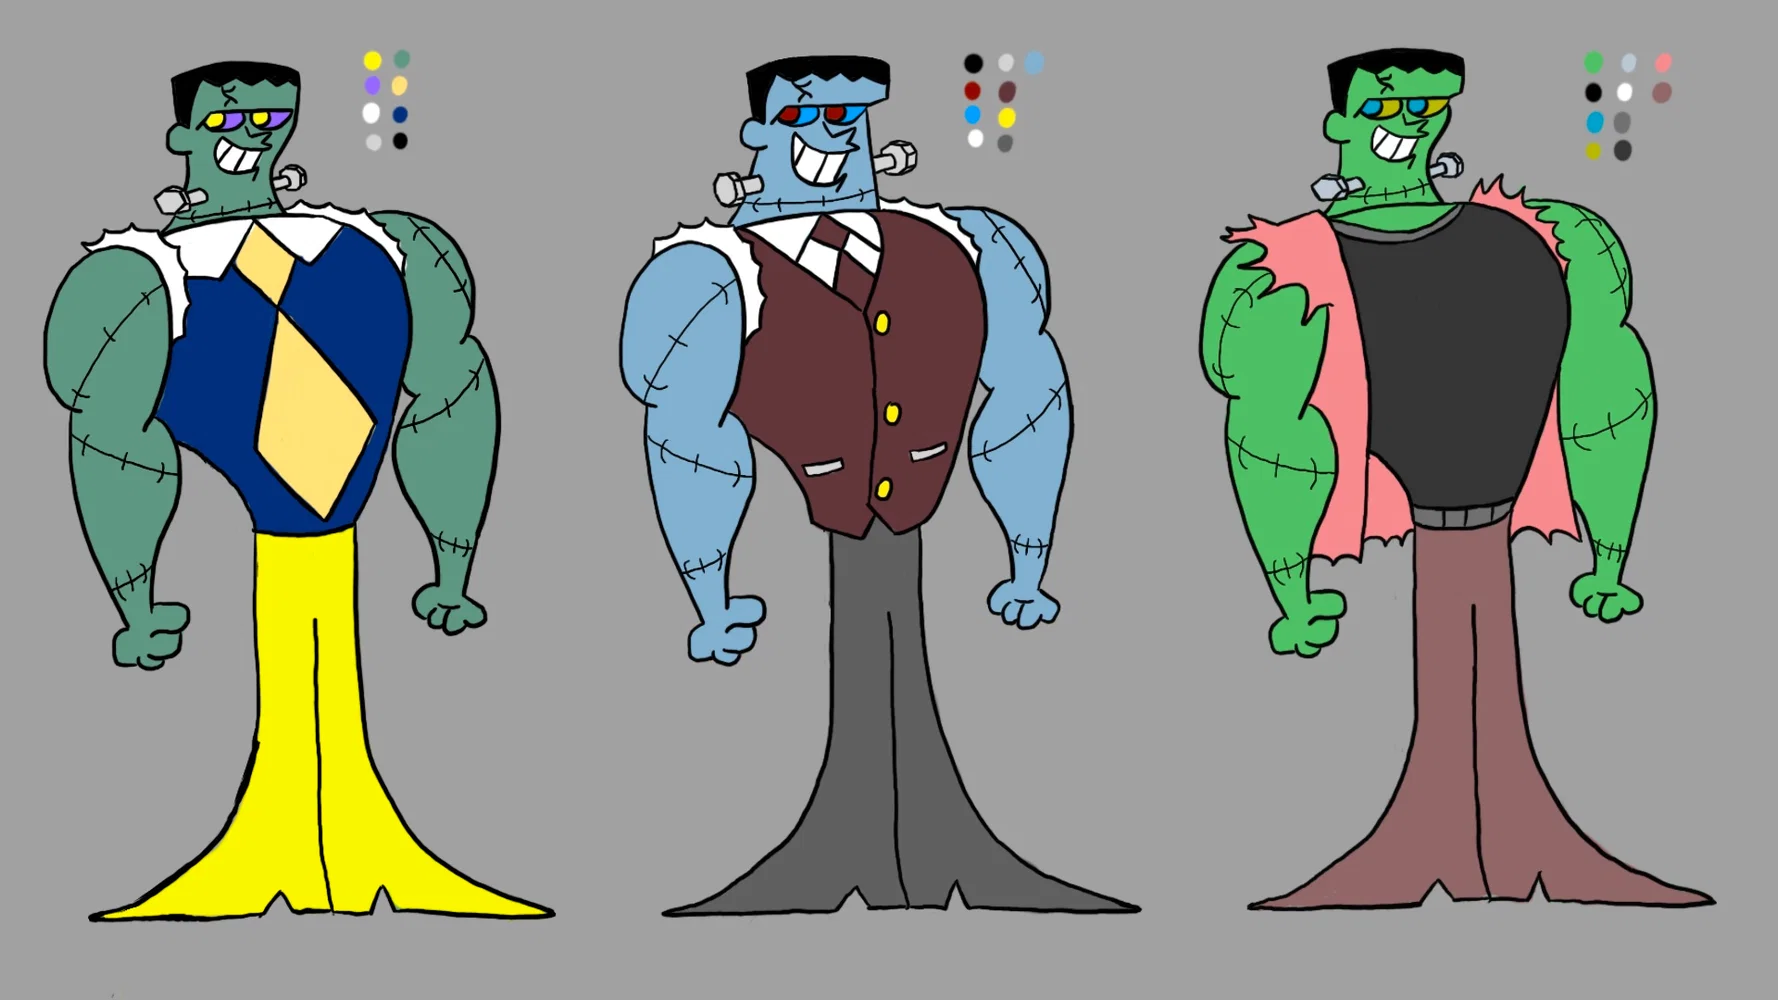 A character line up of the Munster Frankenstein character in the Dexter's Laboratory style.